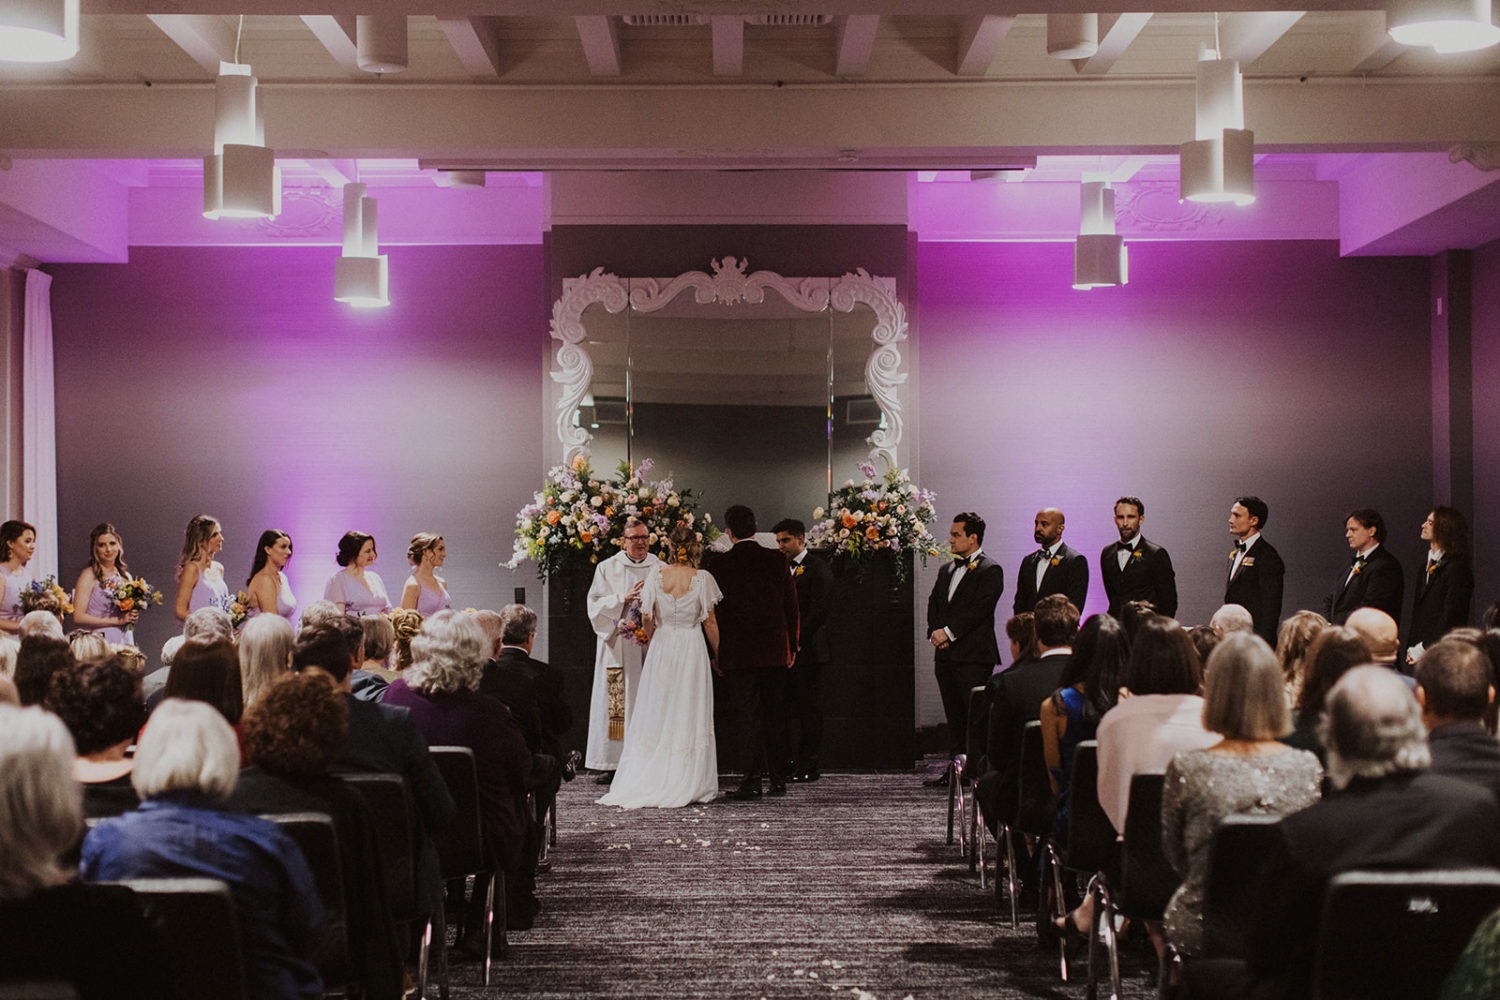 Couple exchanges vows in room with purple lighting